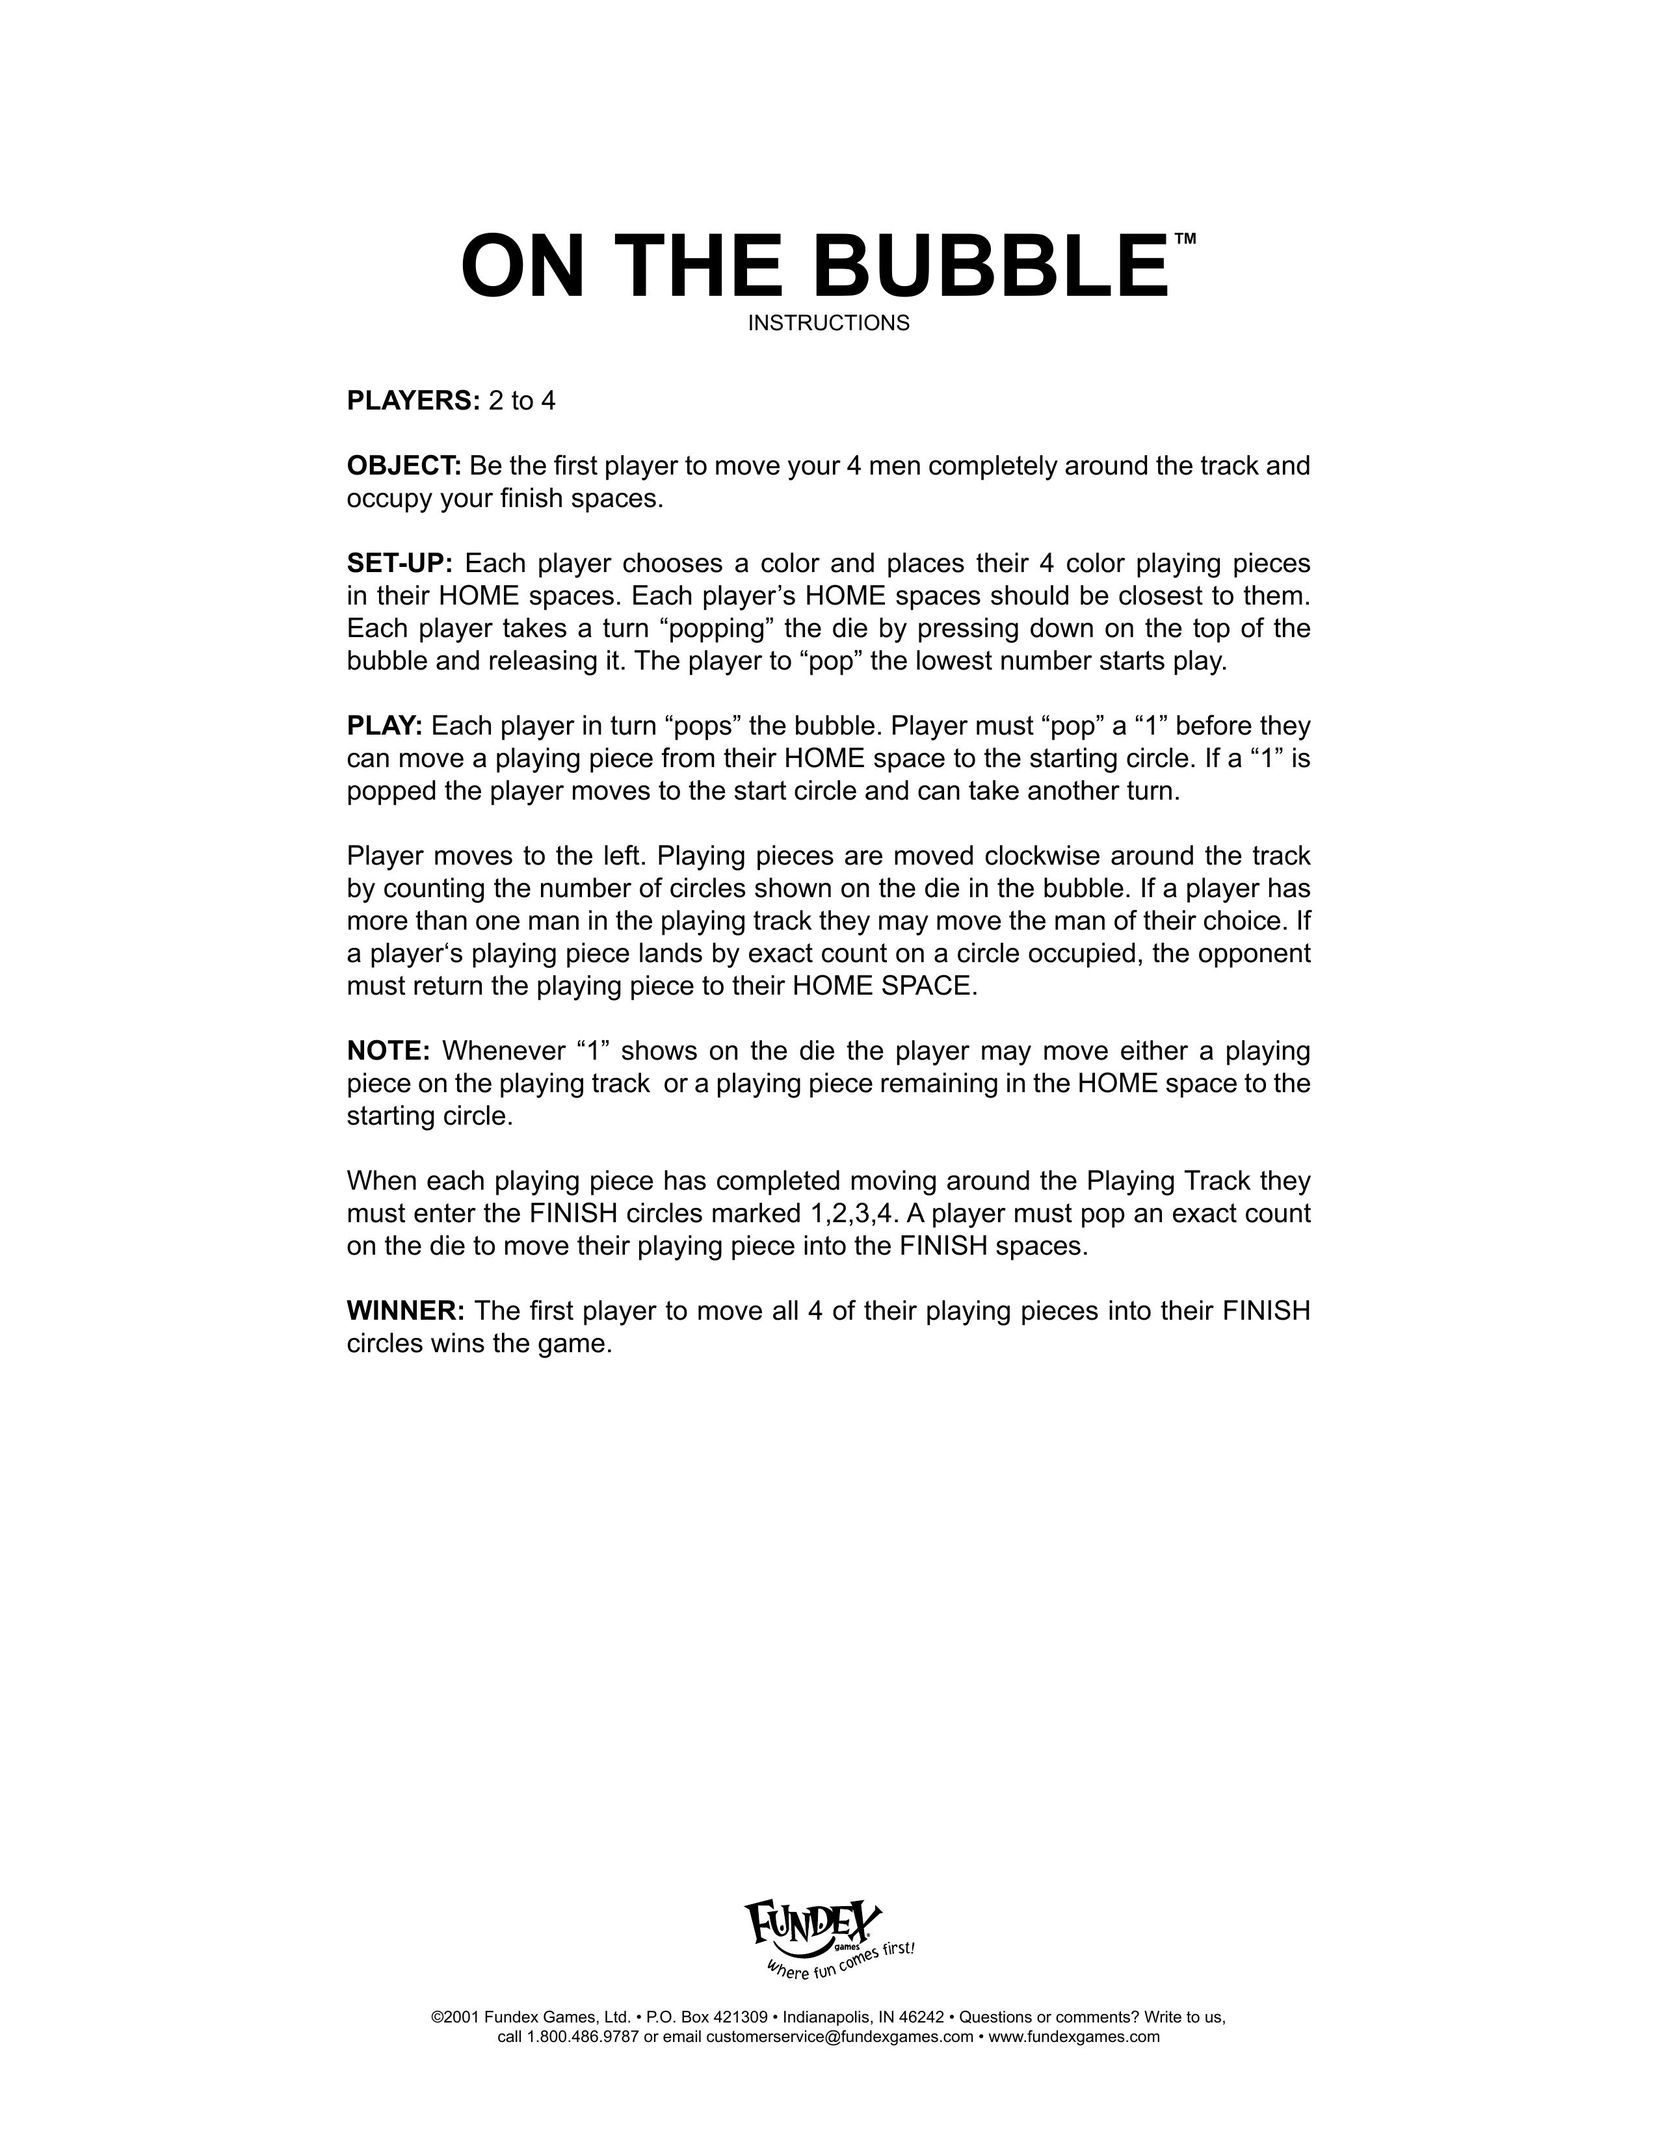 Fundex Games On the Bubble Board Games User Manual